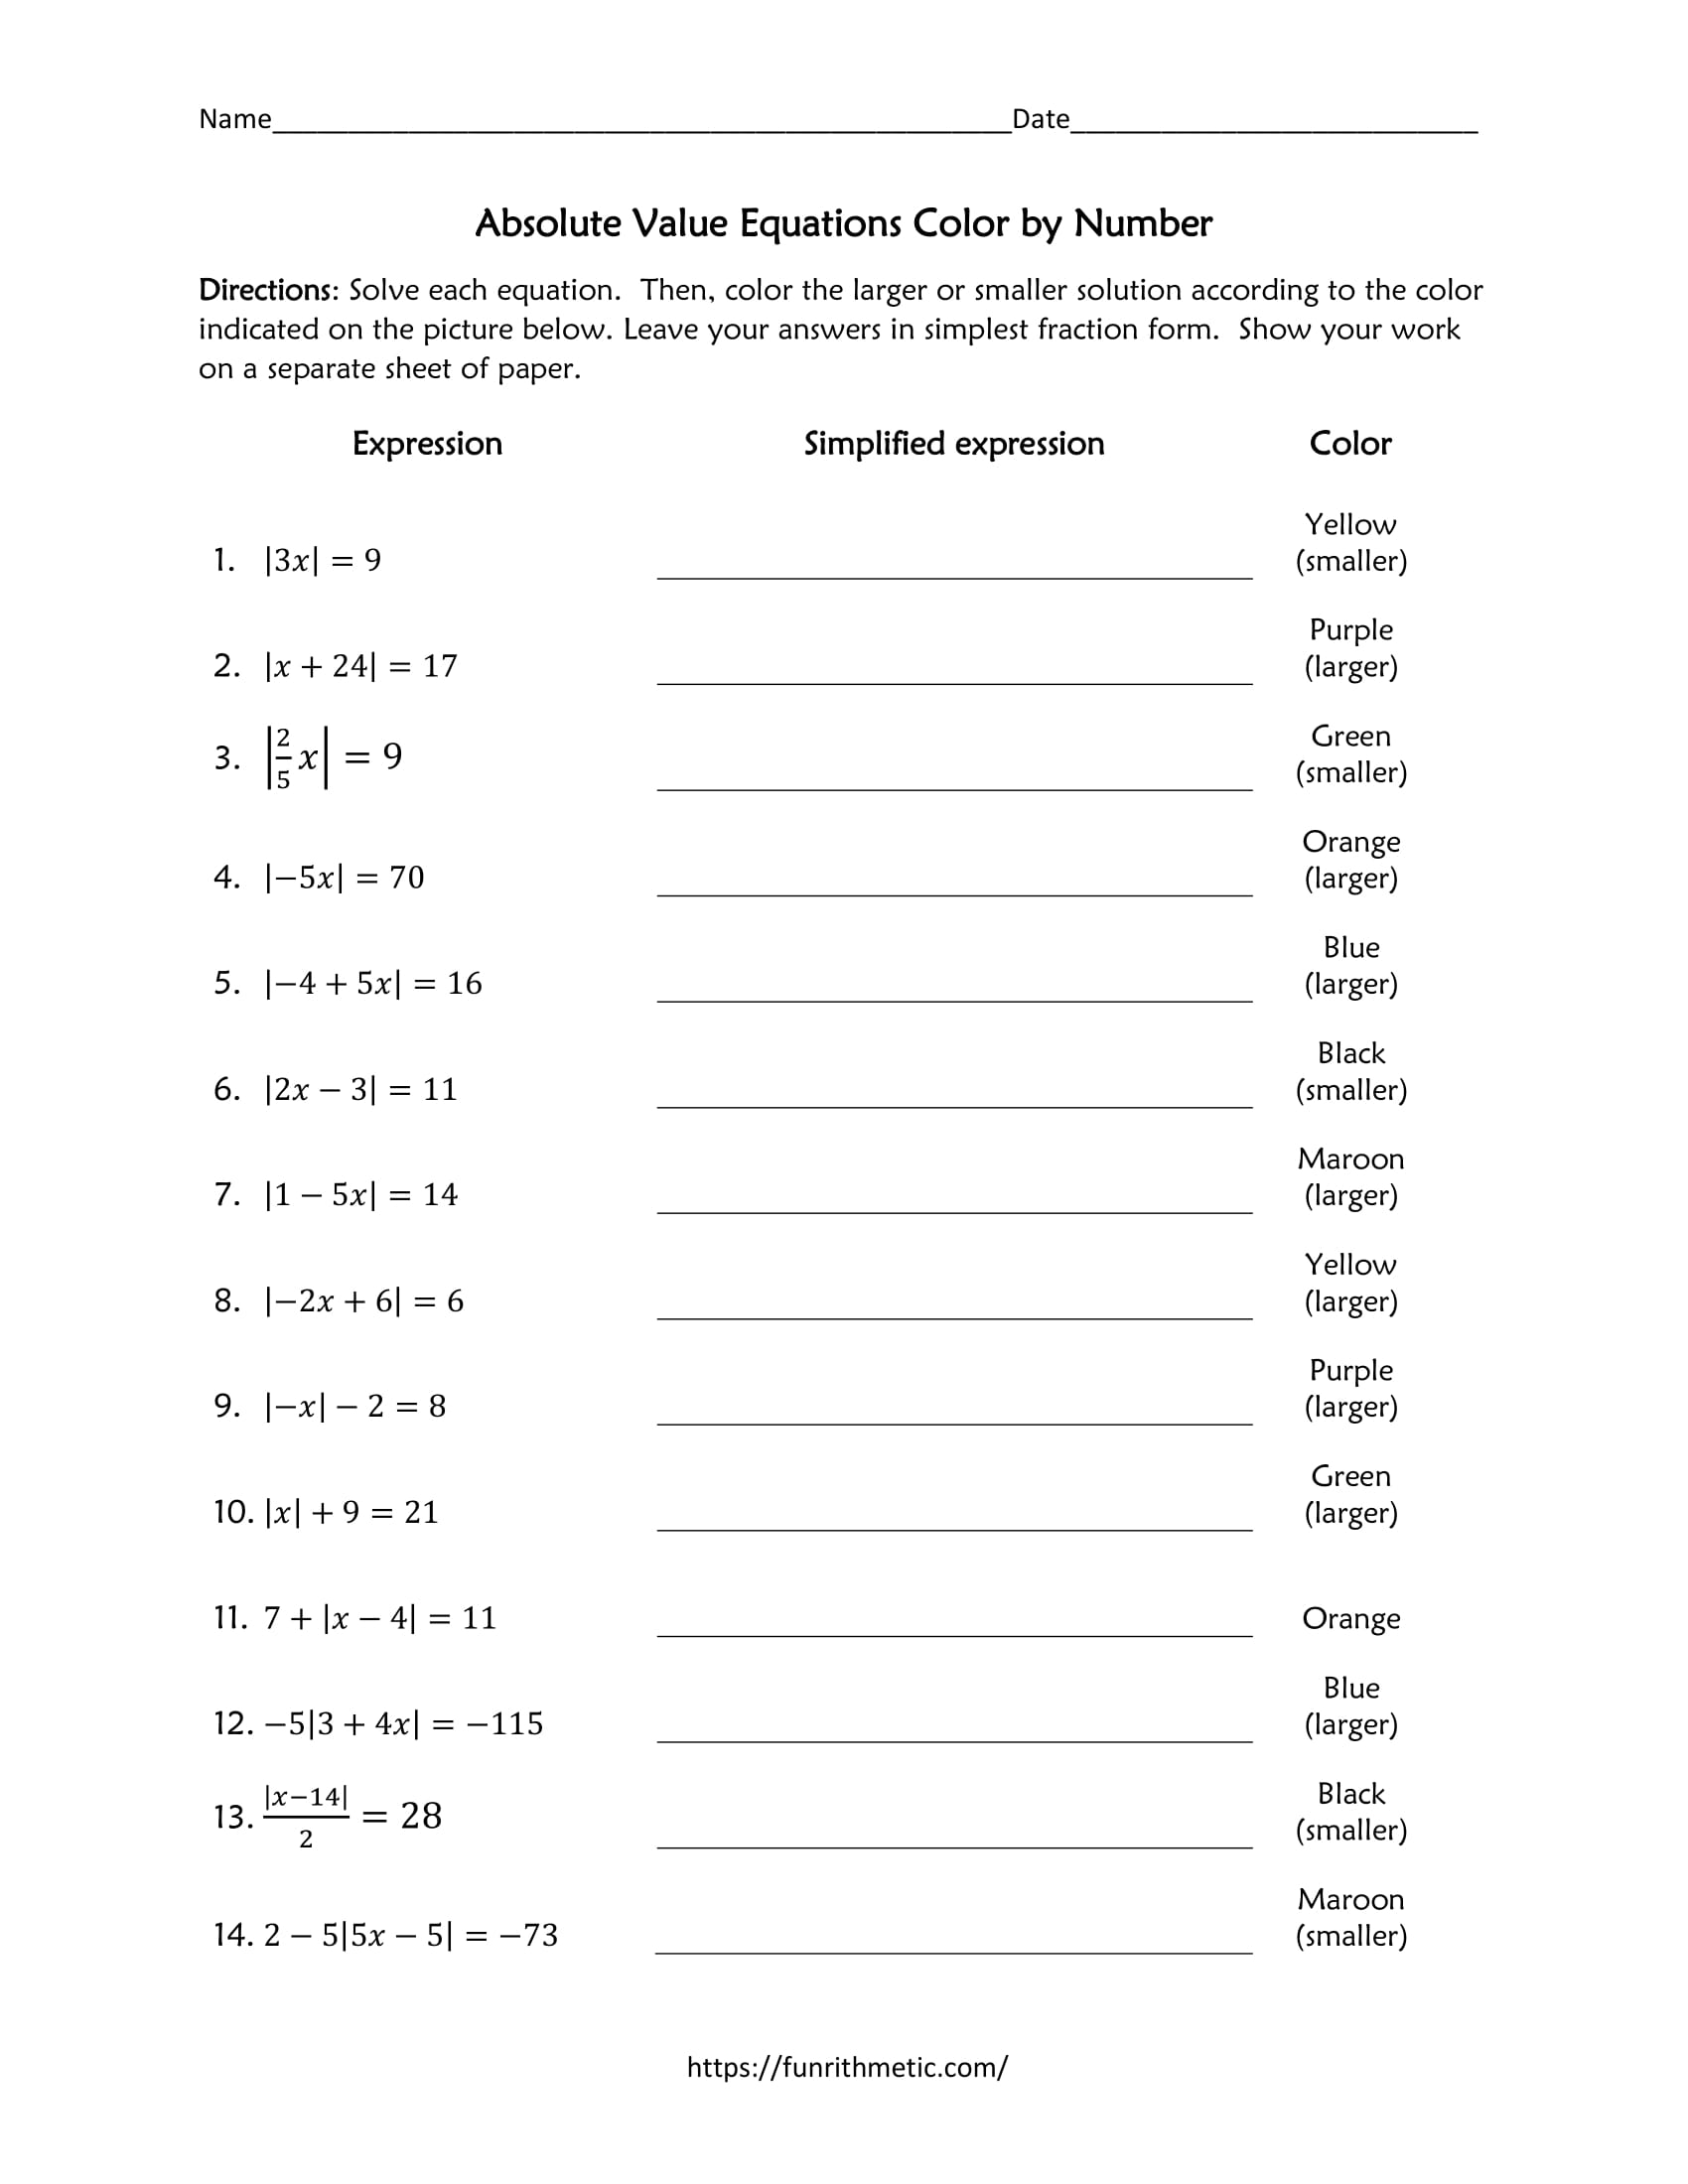 Absolute Value Equations Color by Number Within Absolute Value Equations Worksheet